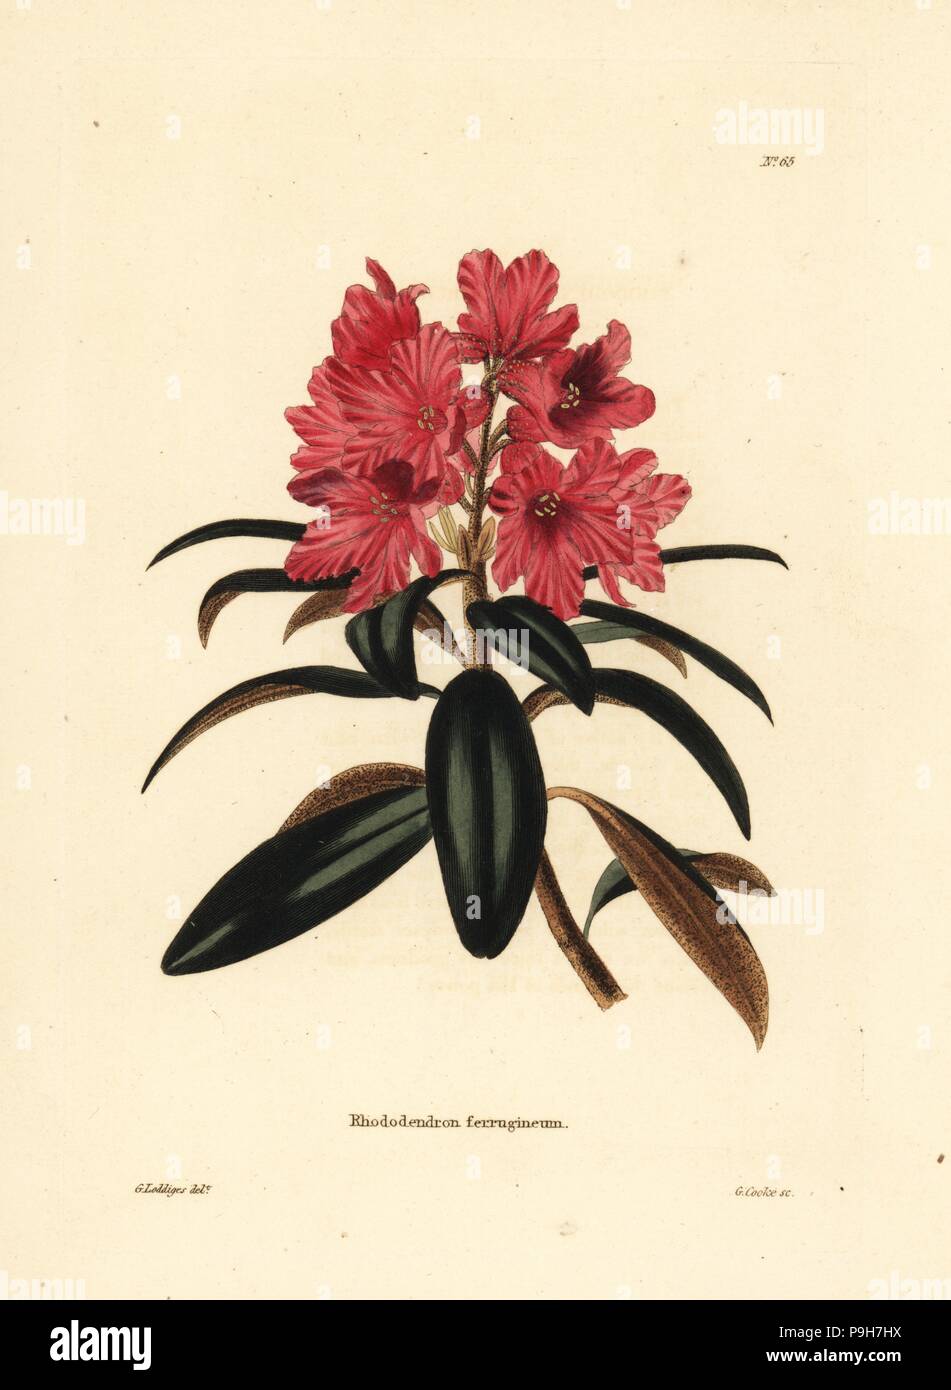 Alpenrose or snow-rose, Rhododendron ferrugineum. Handcoloured copperplate engraving by George Cooke after George Loddiges from Conrad Loddiges' Botanical Cabinet, Hackney, 1817. Stock Photo